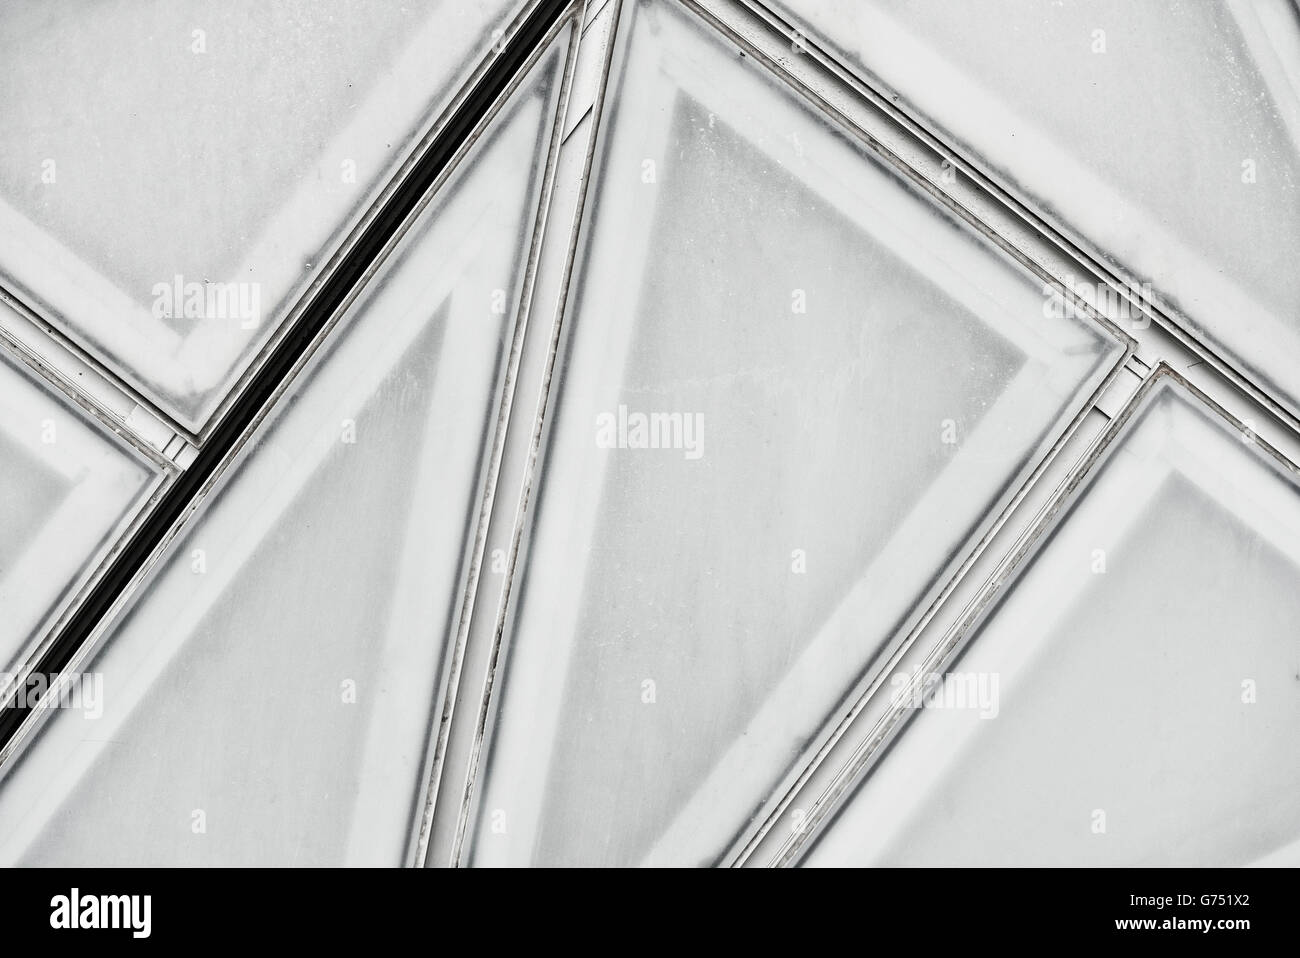 abstract detail of metal and glass architecture Stock Photo